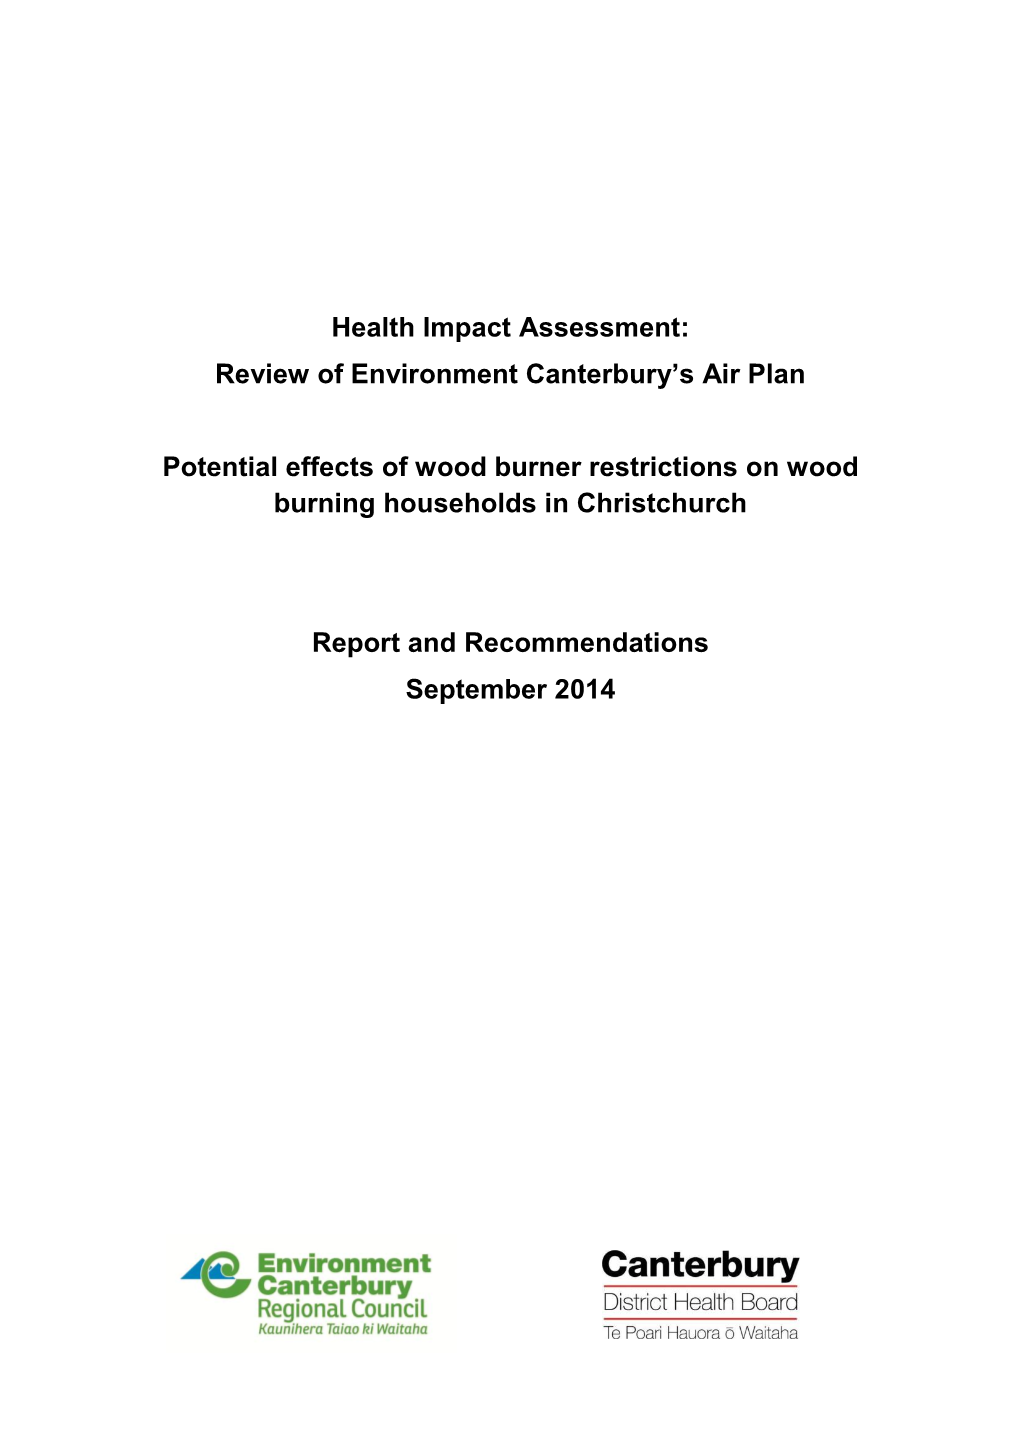 Health Impact Assessment: Review of Environment Canterbury’S Air Plan